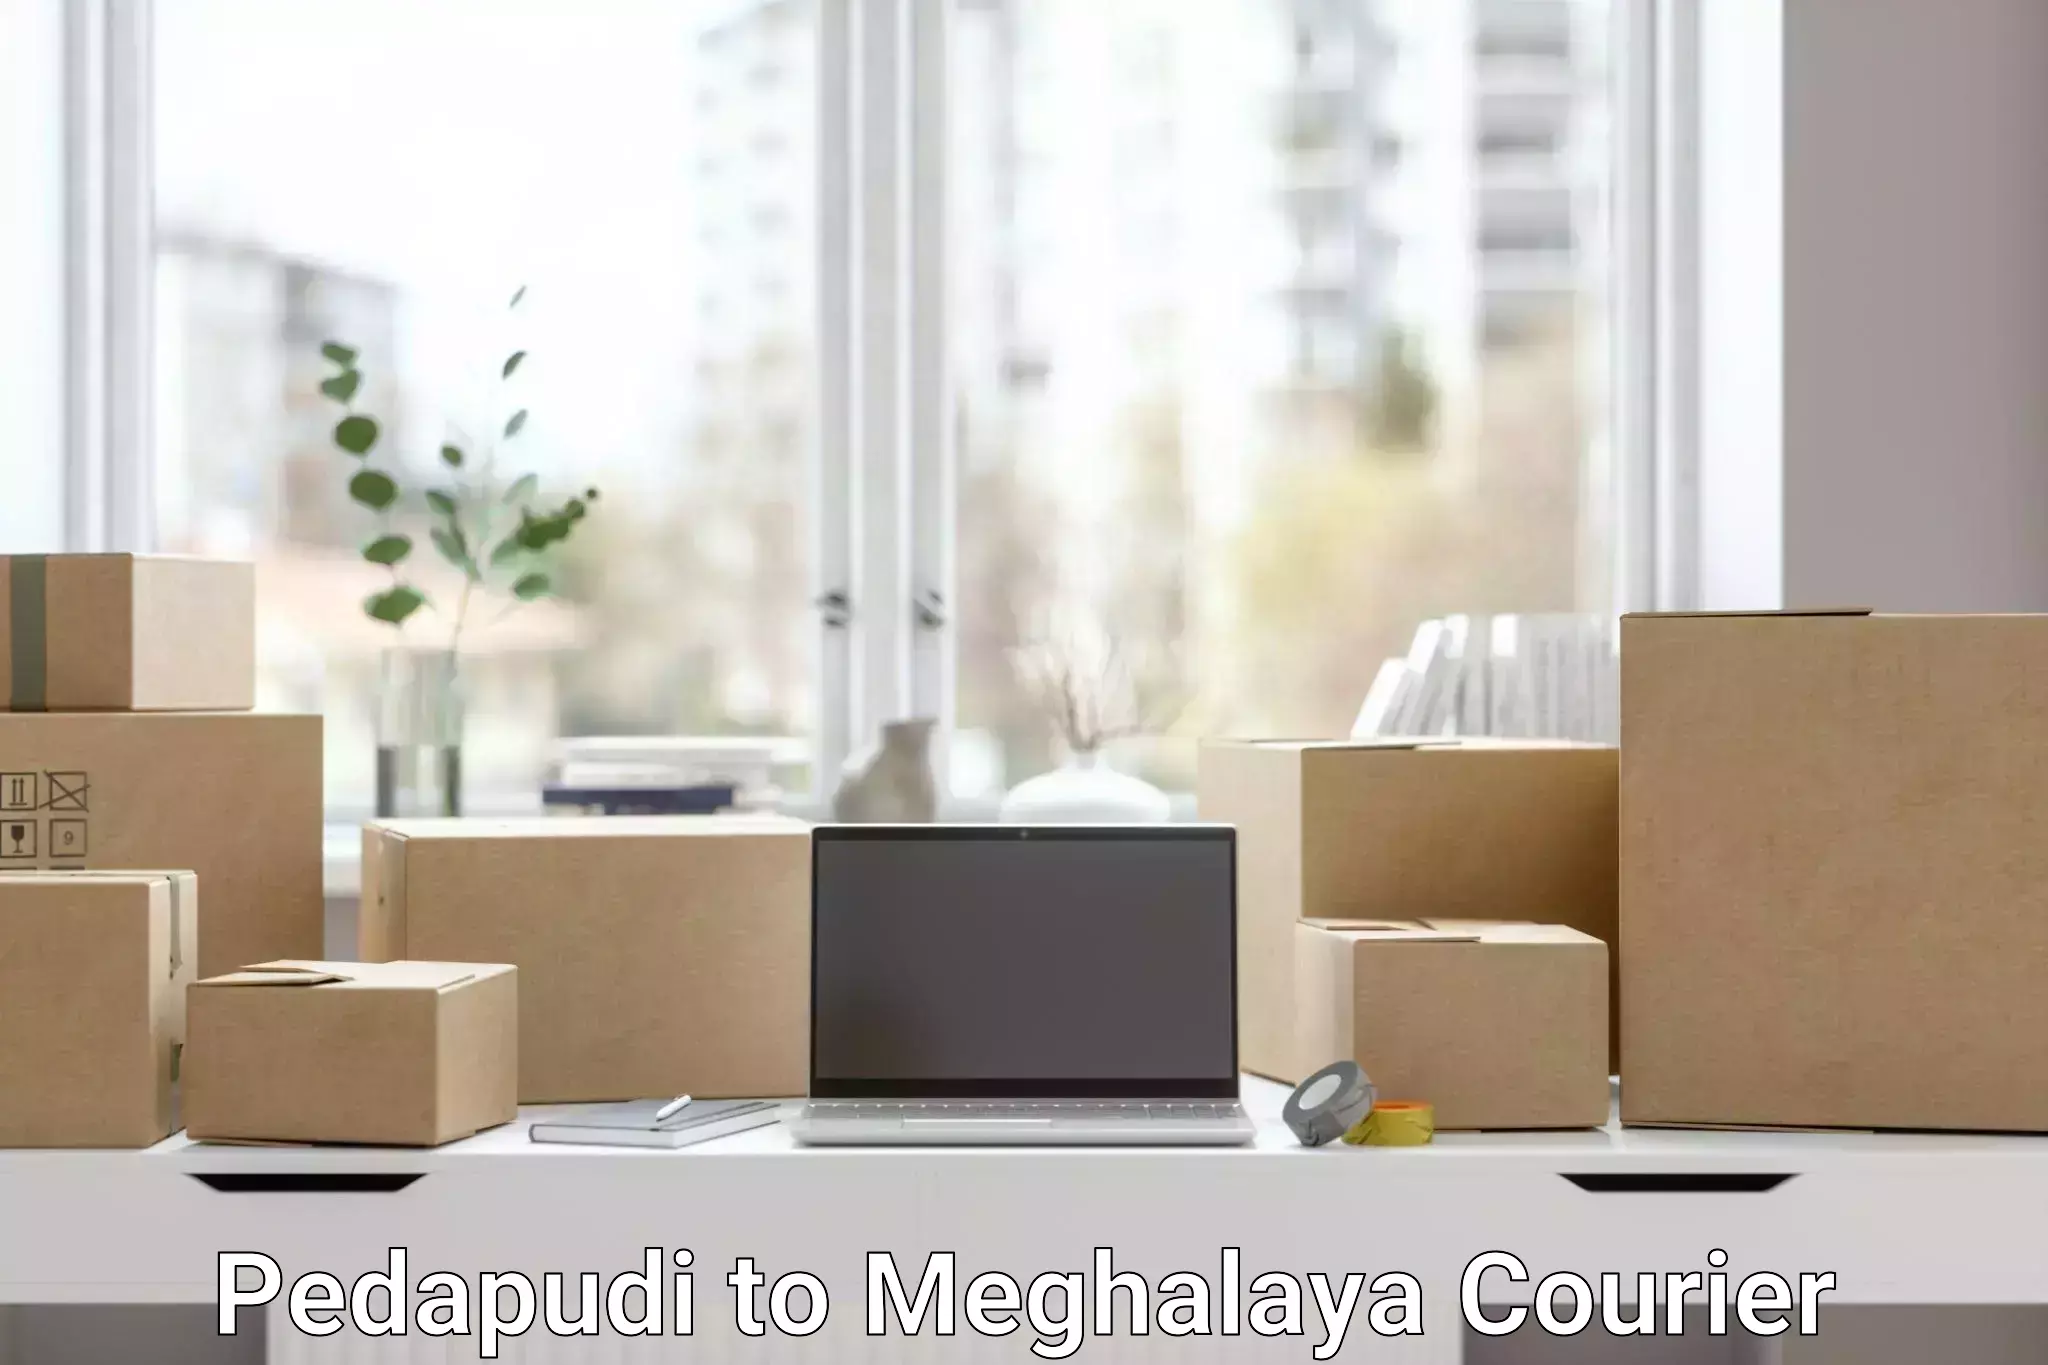 Delivery service partnership Pedapudi to Marshillong